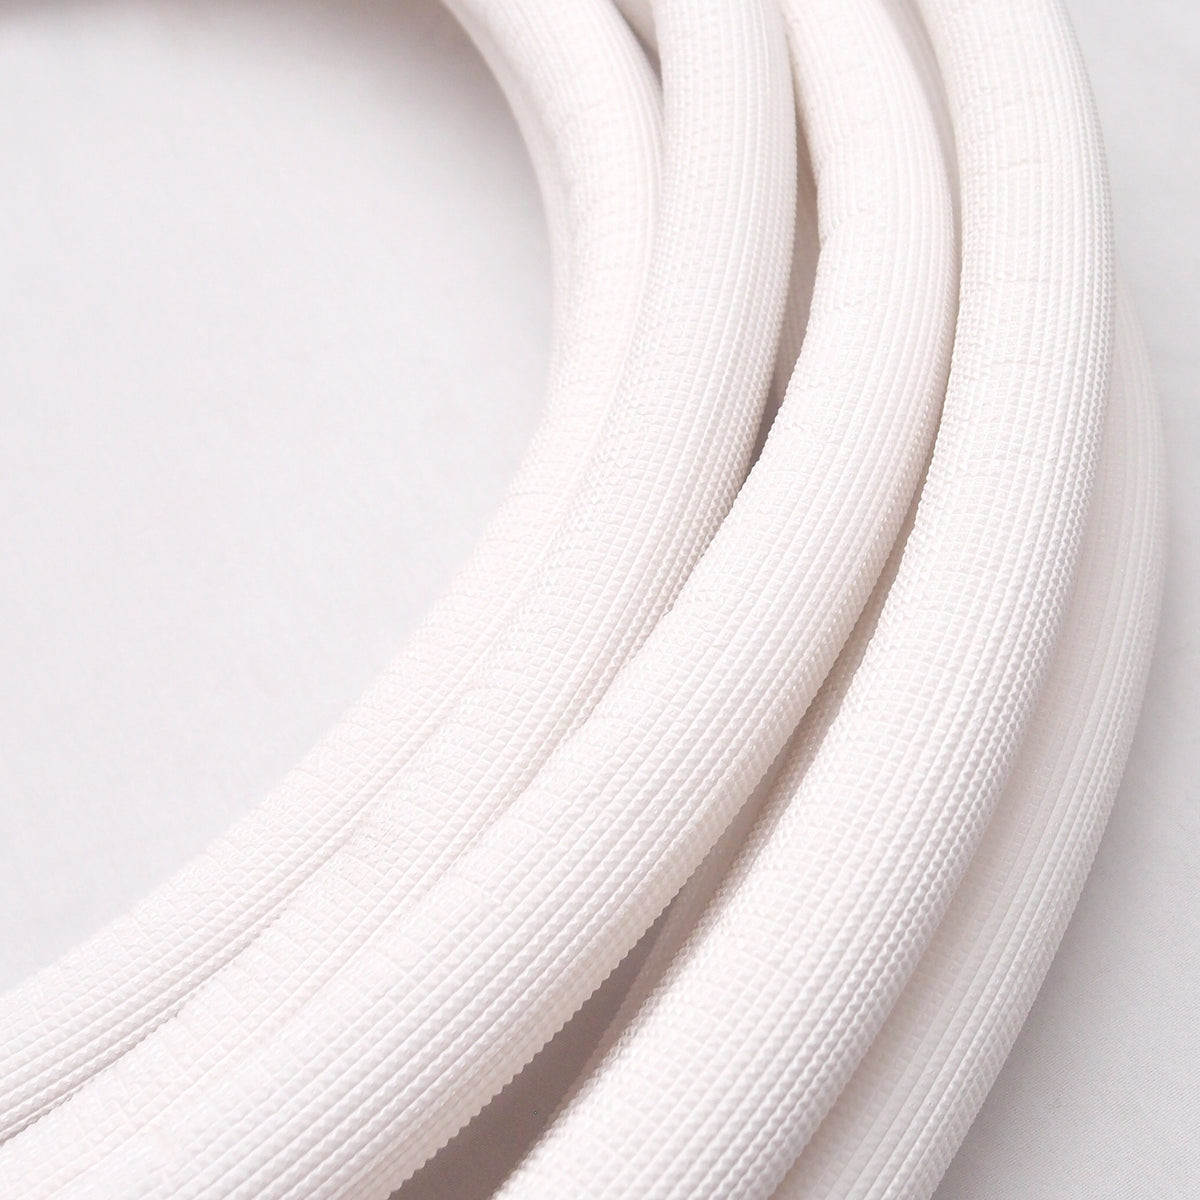 7/8&quot; Insulated Copper Coil Line - 1/2&quot; White Insulation - 15&#39; Long